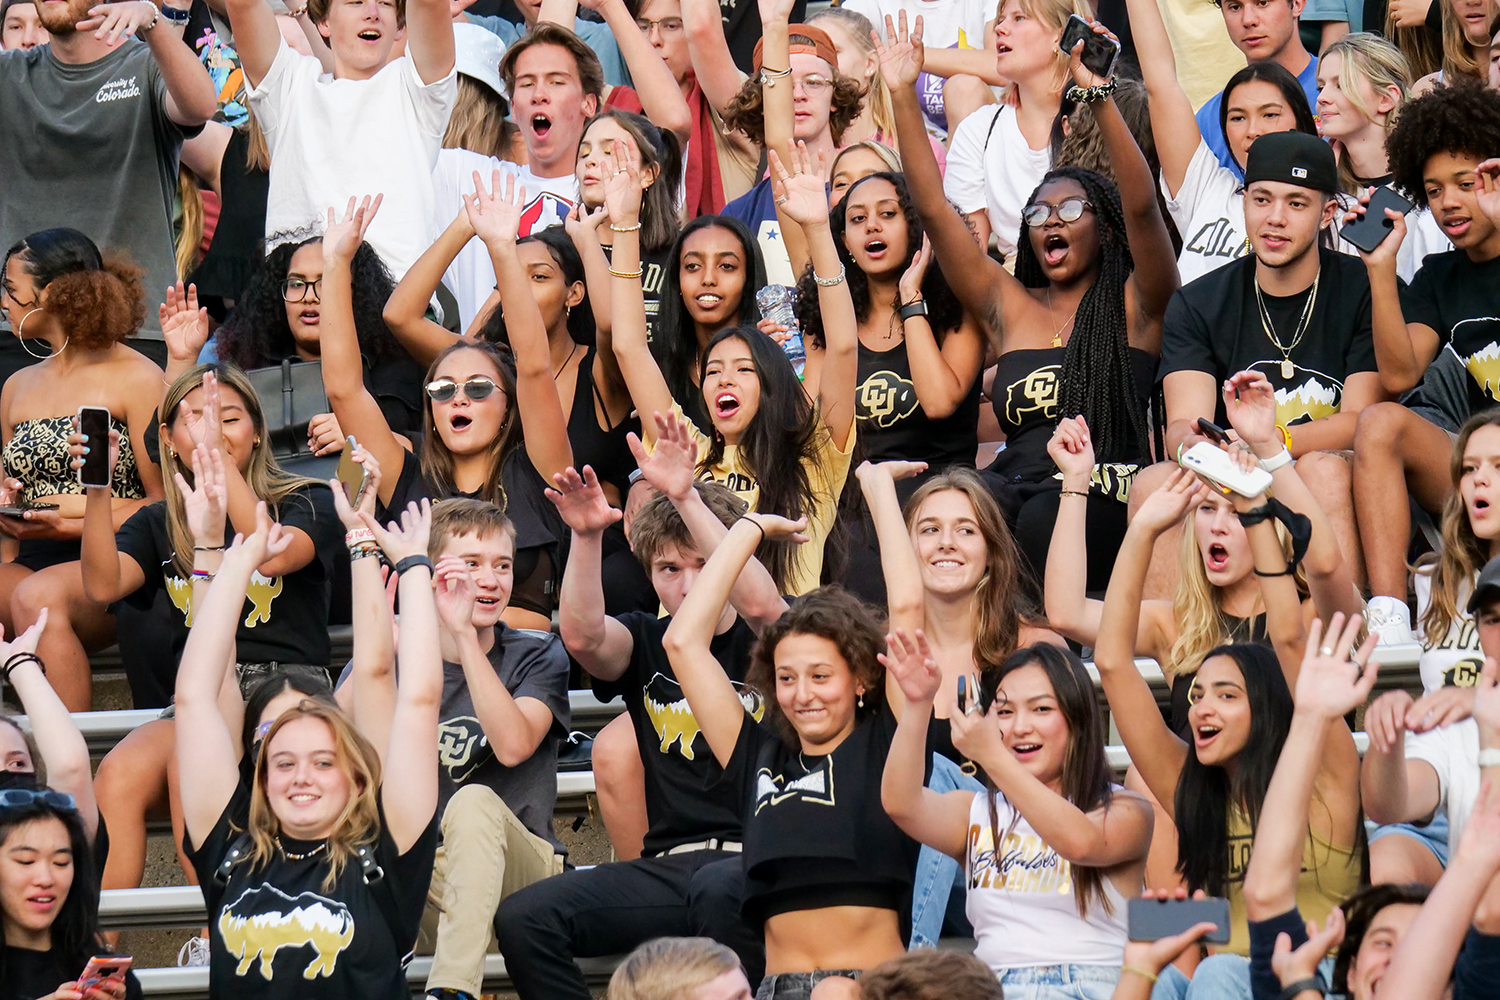 Students cheering on the Buffs during a football game